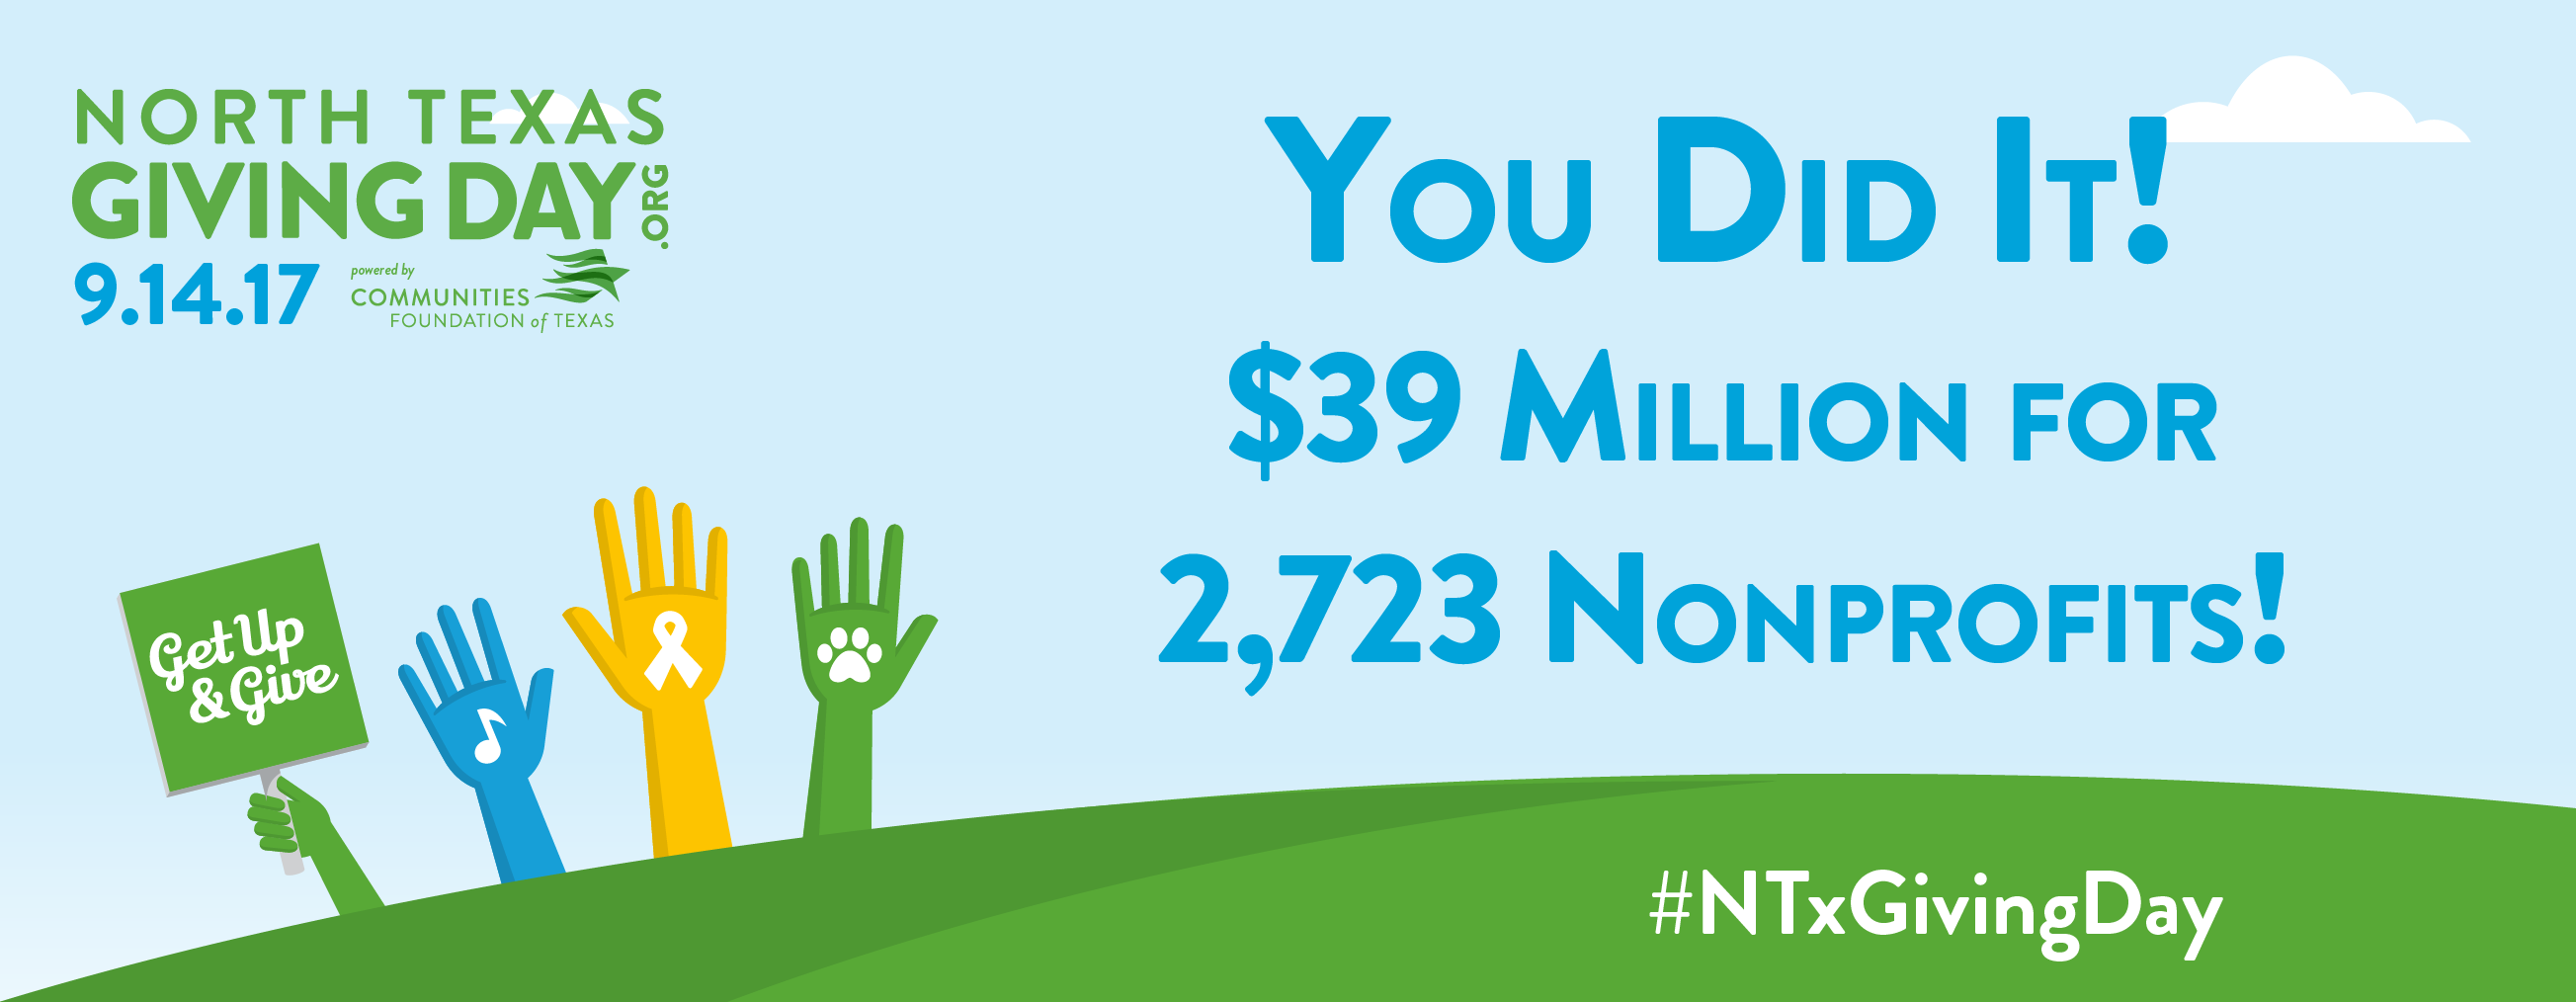 Raising $25,000 on North Texas Giving Day